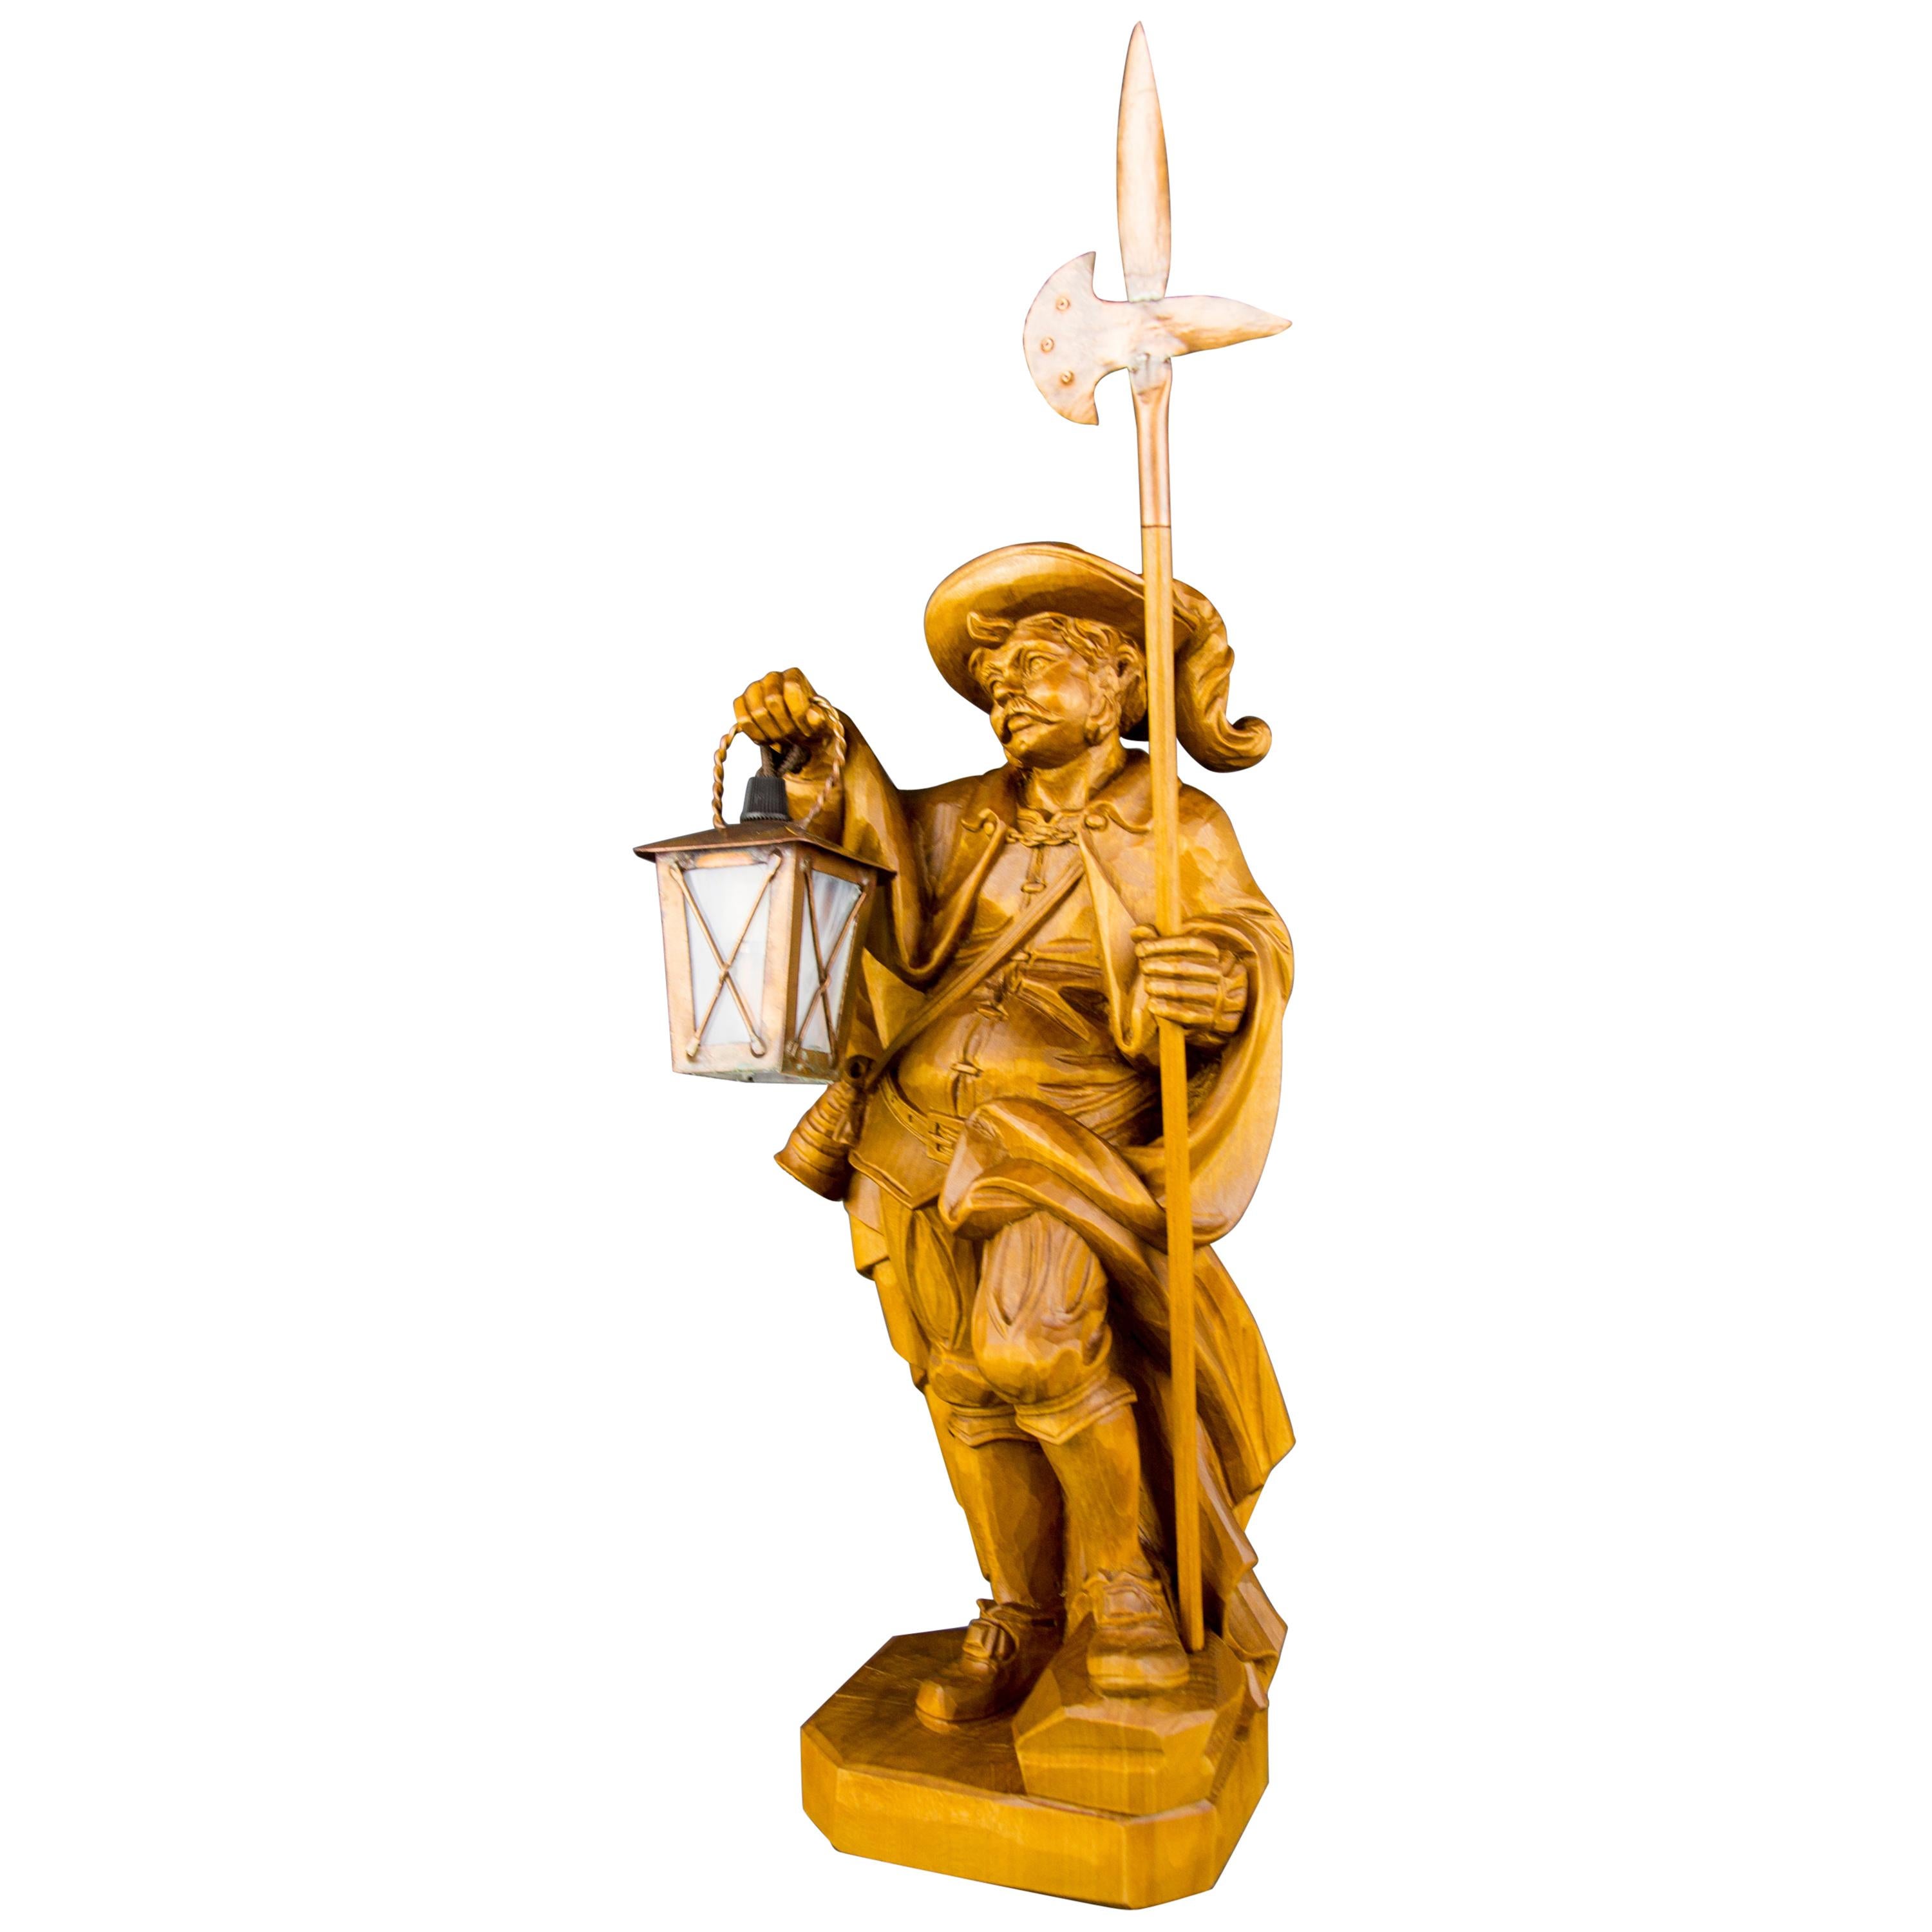 A masterfully hand-carved wooden lamp features a beautiful sculpture of a night watchman with a lantern and halberd. The lantern is made of glass and copper. This beautiful sculpture lamp can be used as a large table lamp. Germany, mid-20th